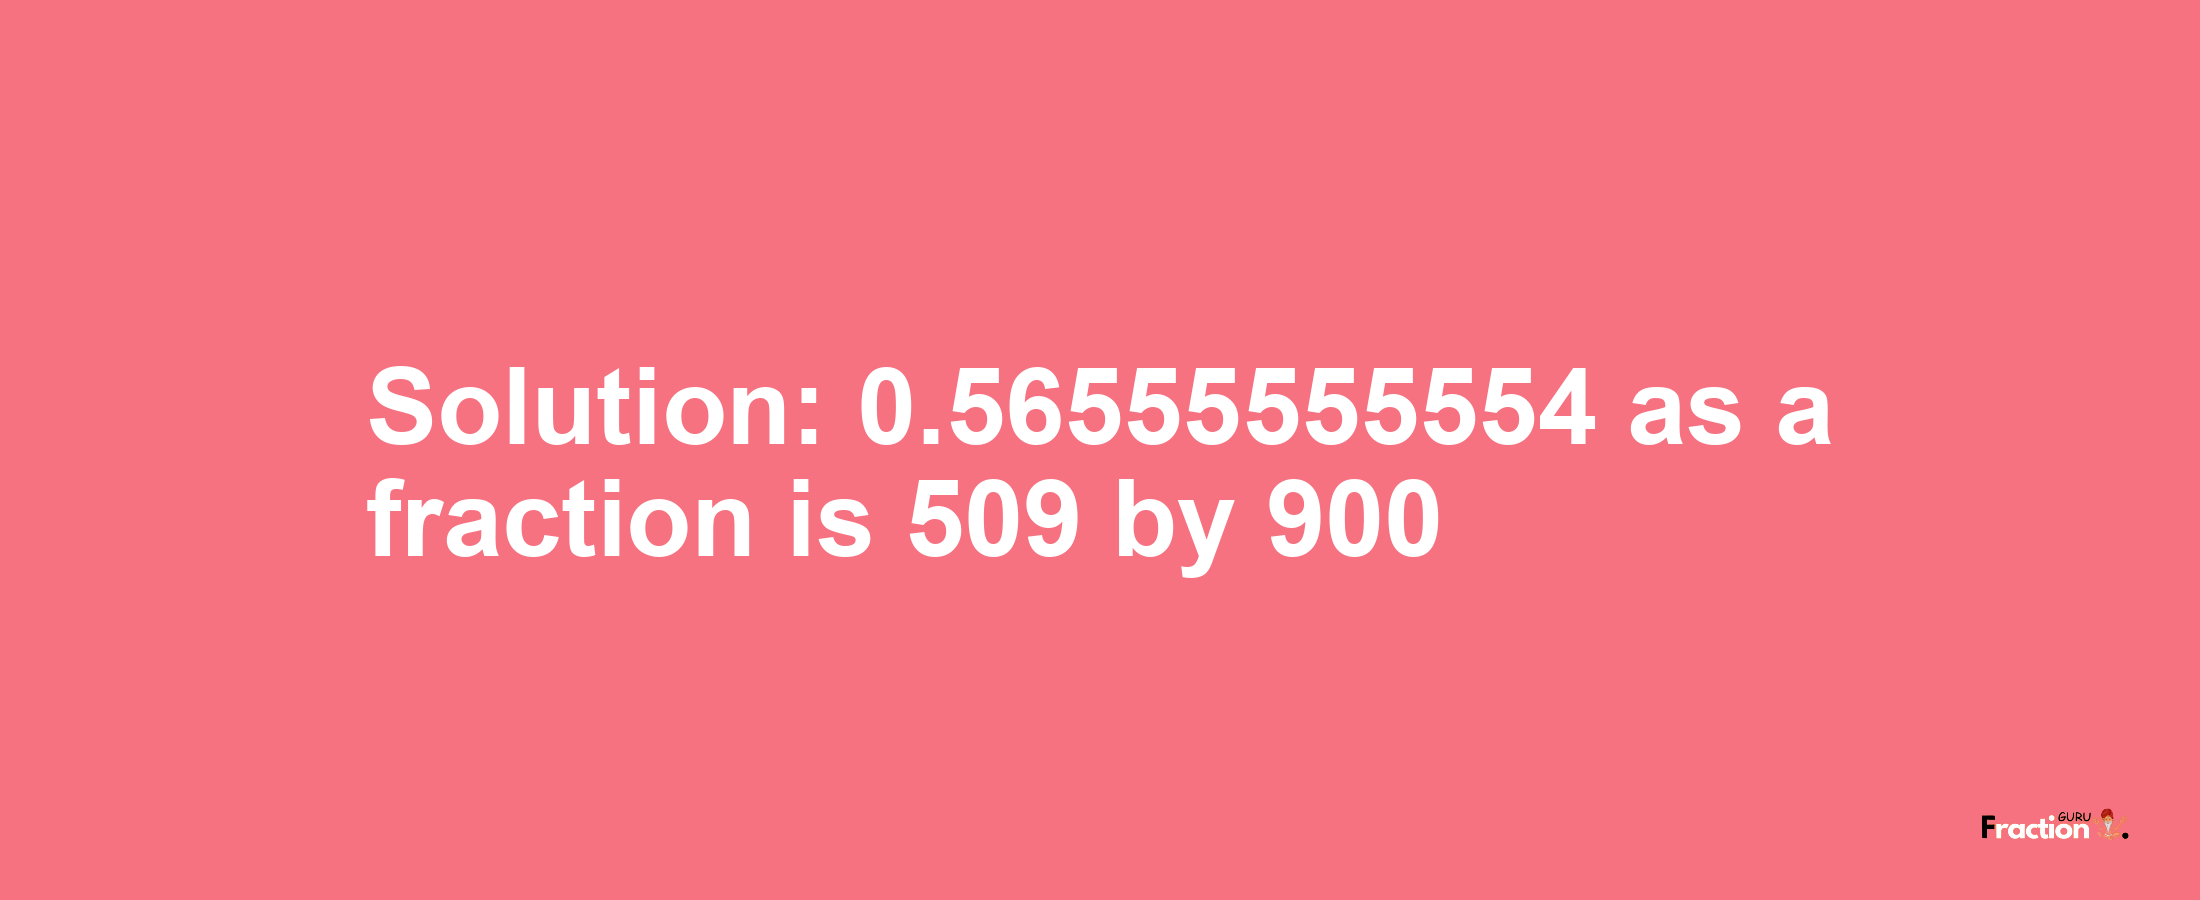 Solution:0.56555555554 as a fraction is 509/900